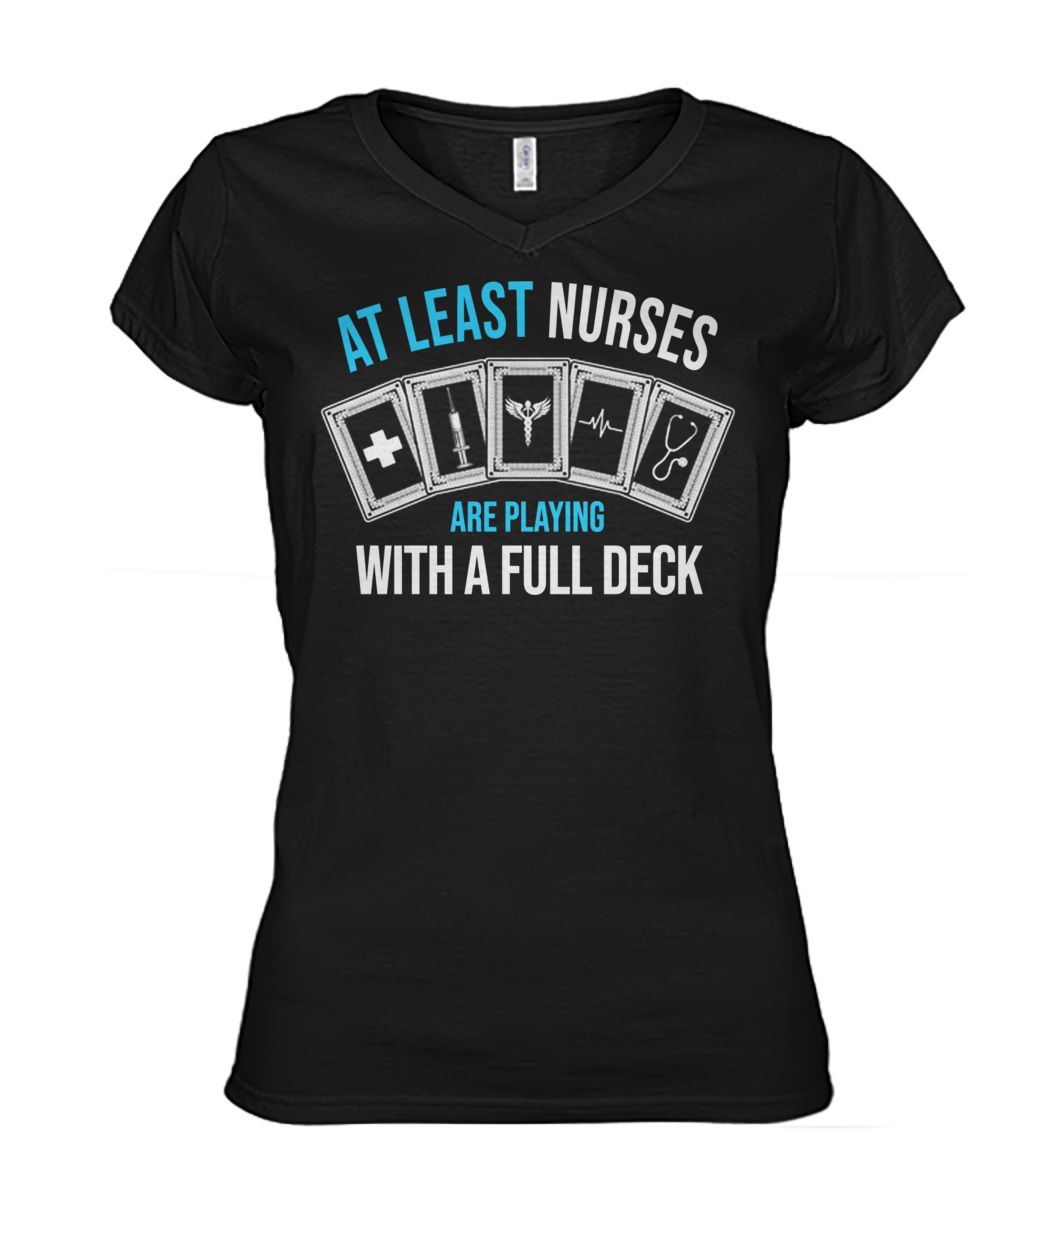 At least nurse are playing with a full deck women's v-neck